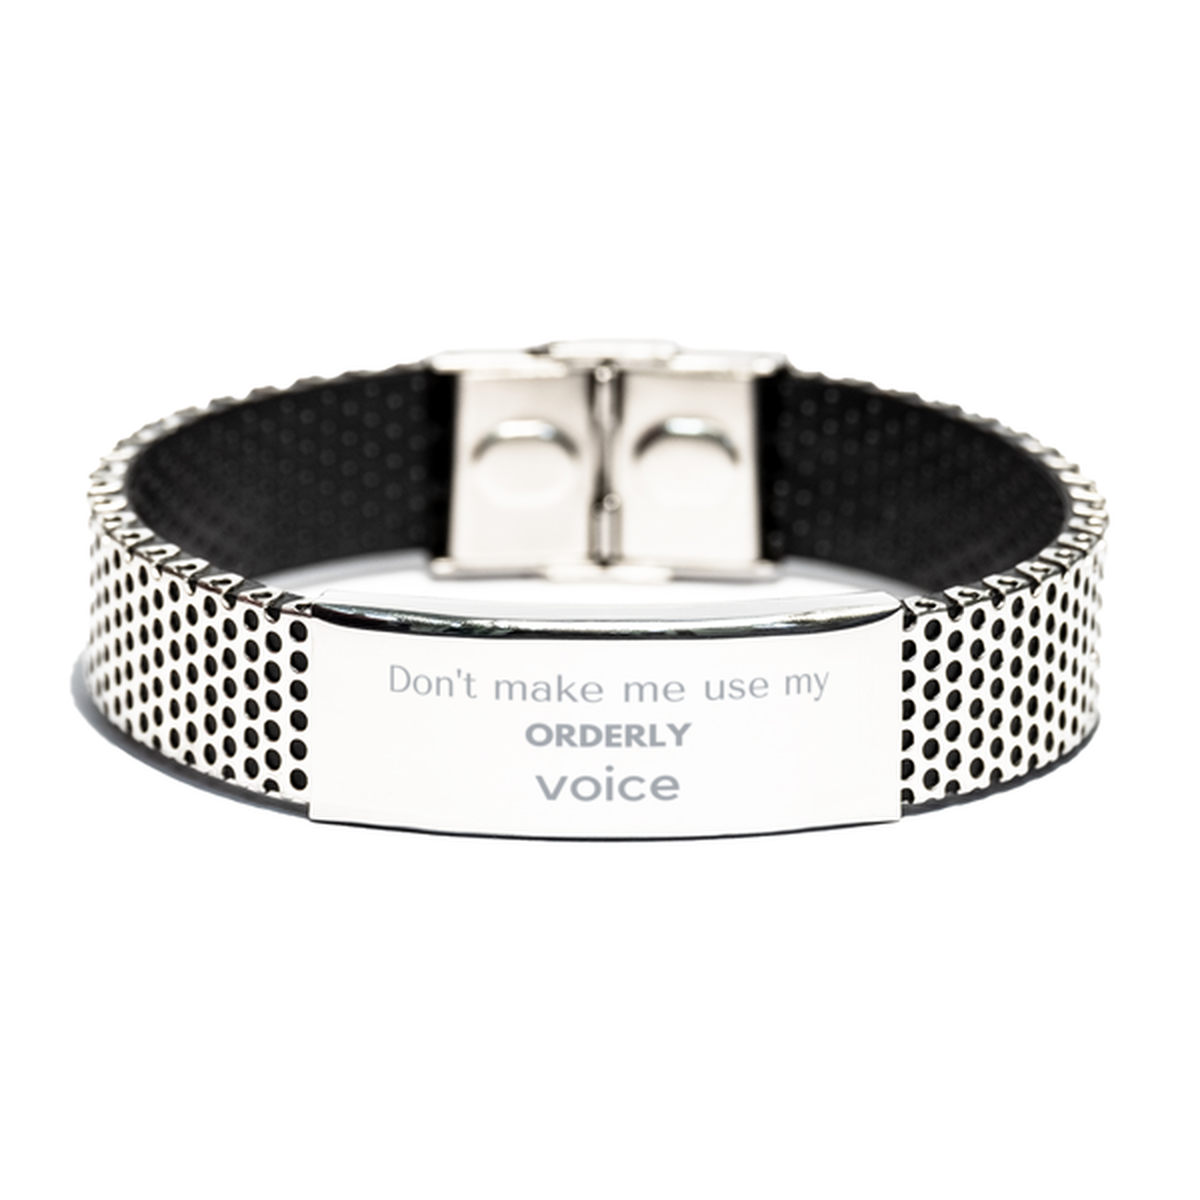 Don't make me use my Orderly voice, Sarcasm Orderly Gifts, Christmas Orderly Stainless Steel Bracelet Birthday Unique Gifts For Orderly Coworkers, Men, Women, Colleague, Friends